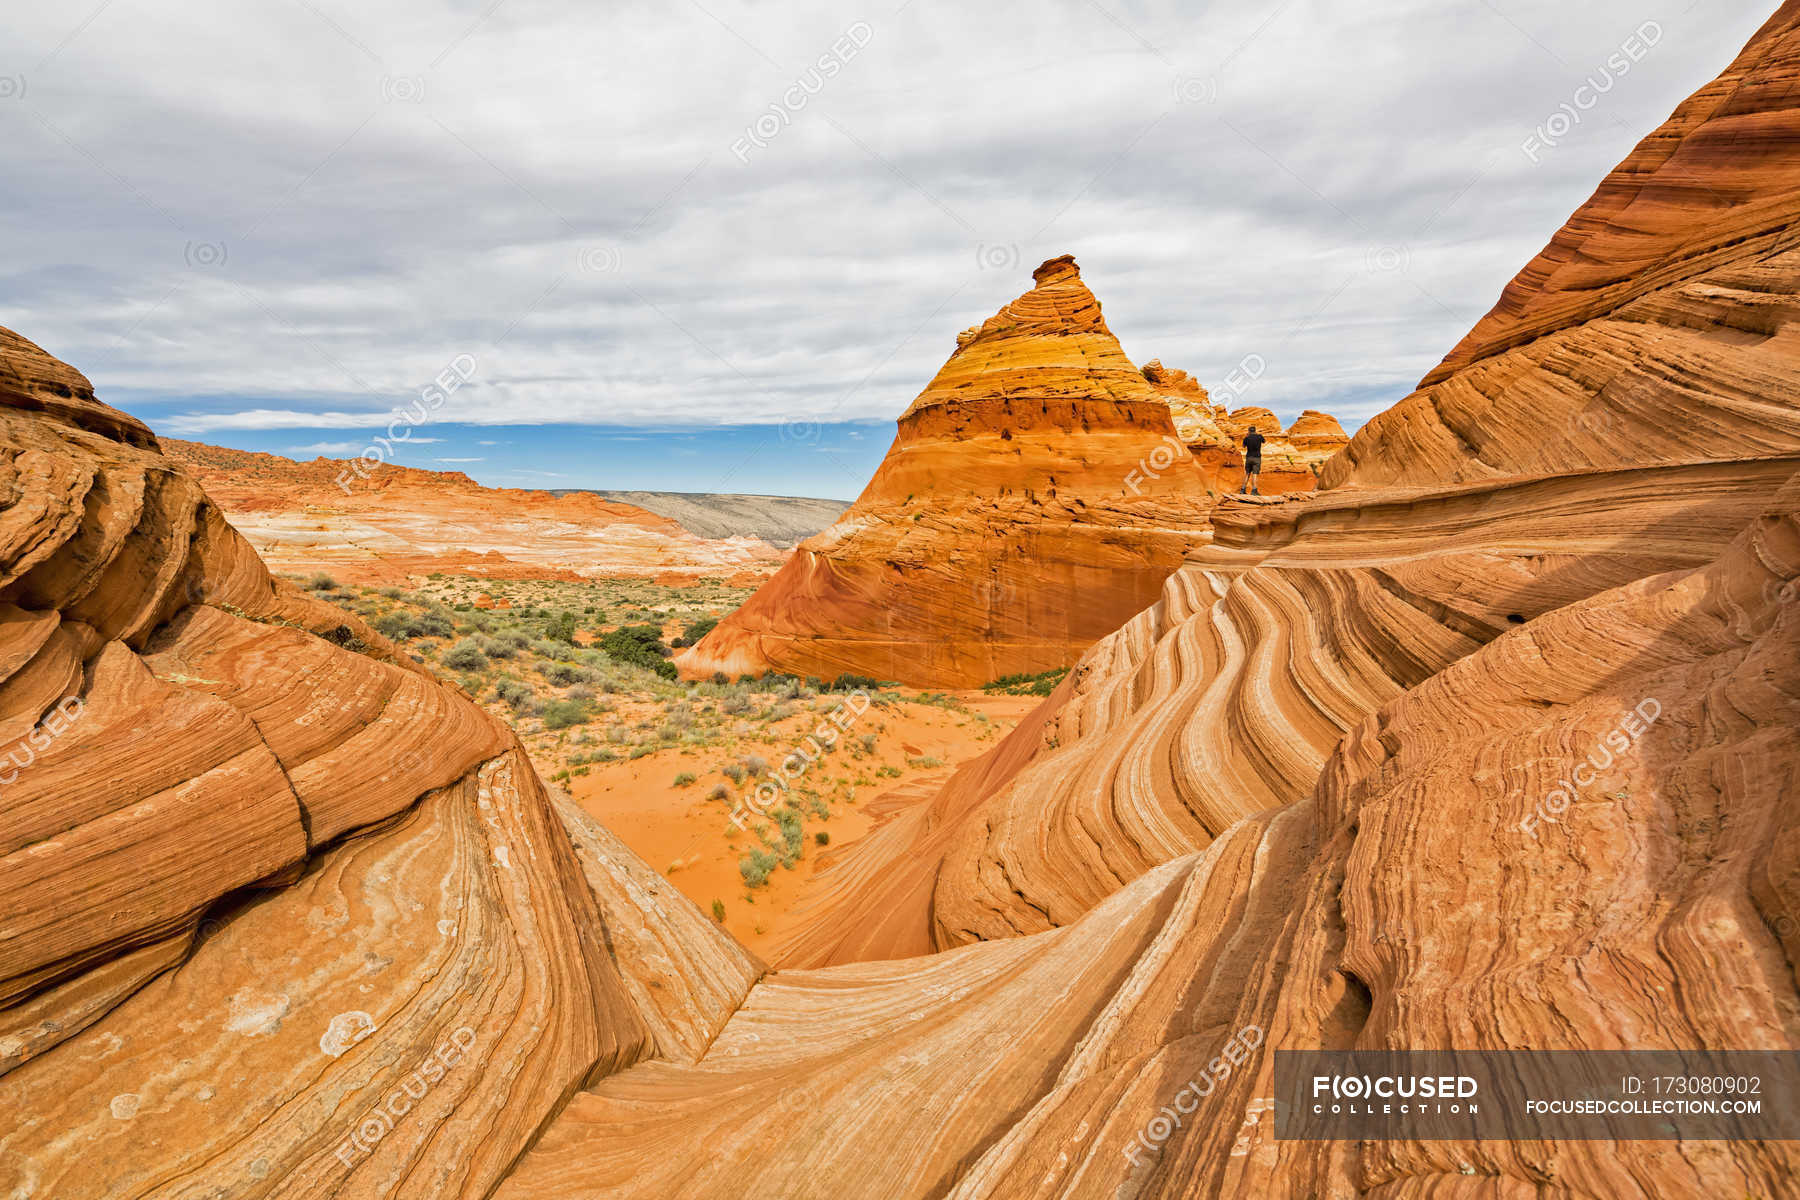 Arizona, Paria Canyon-Vermilion Cliffs Wilderness Picturesque Spurs Of Red  Sandstone The Concept Of Active, Extreme And Photo Tourism Stock Photo,  Picture And Royalty Free Image, Paria Canyon Vermilion Cliffs Wilderness  Area